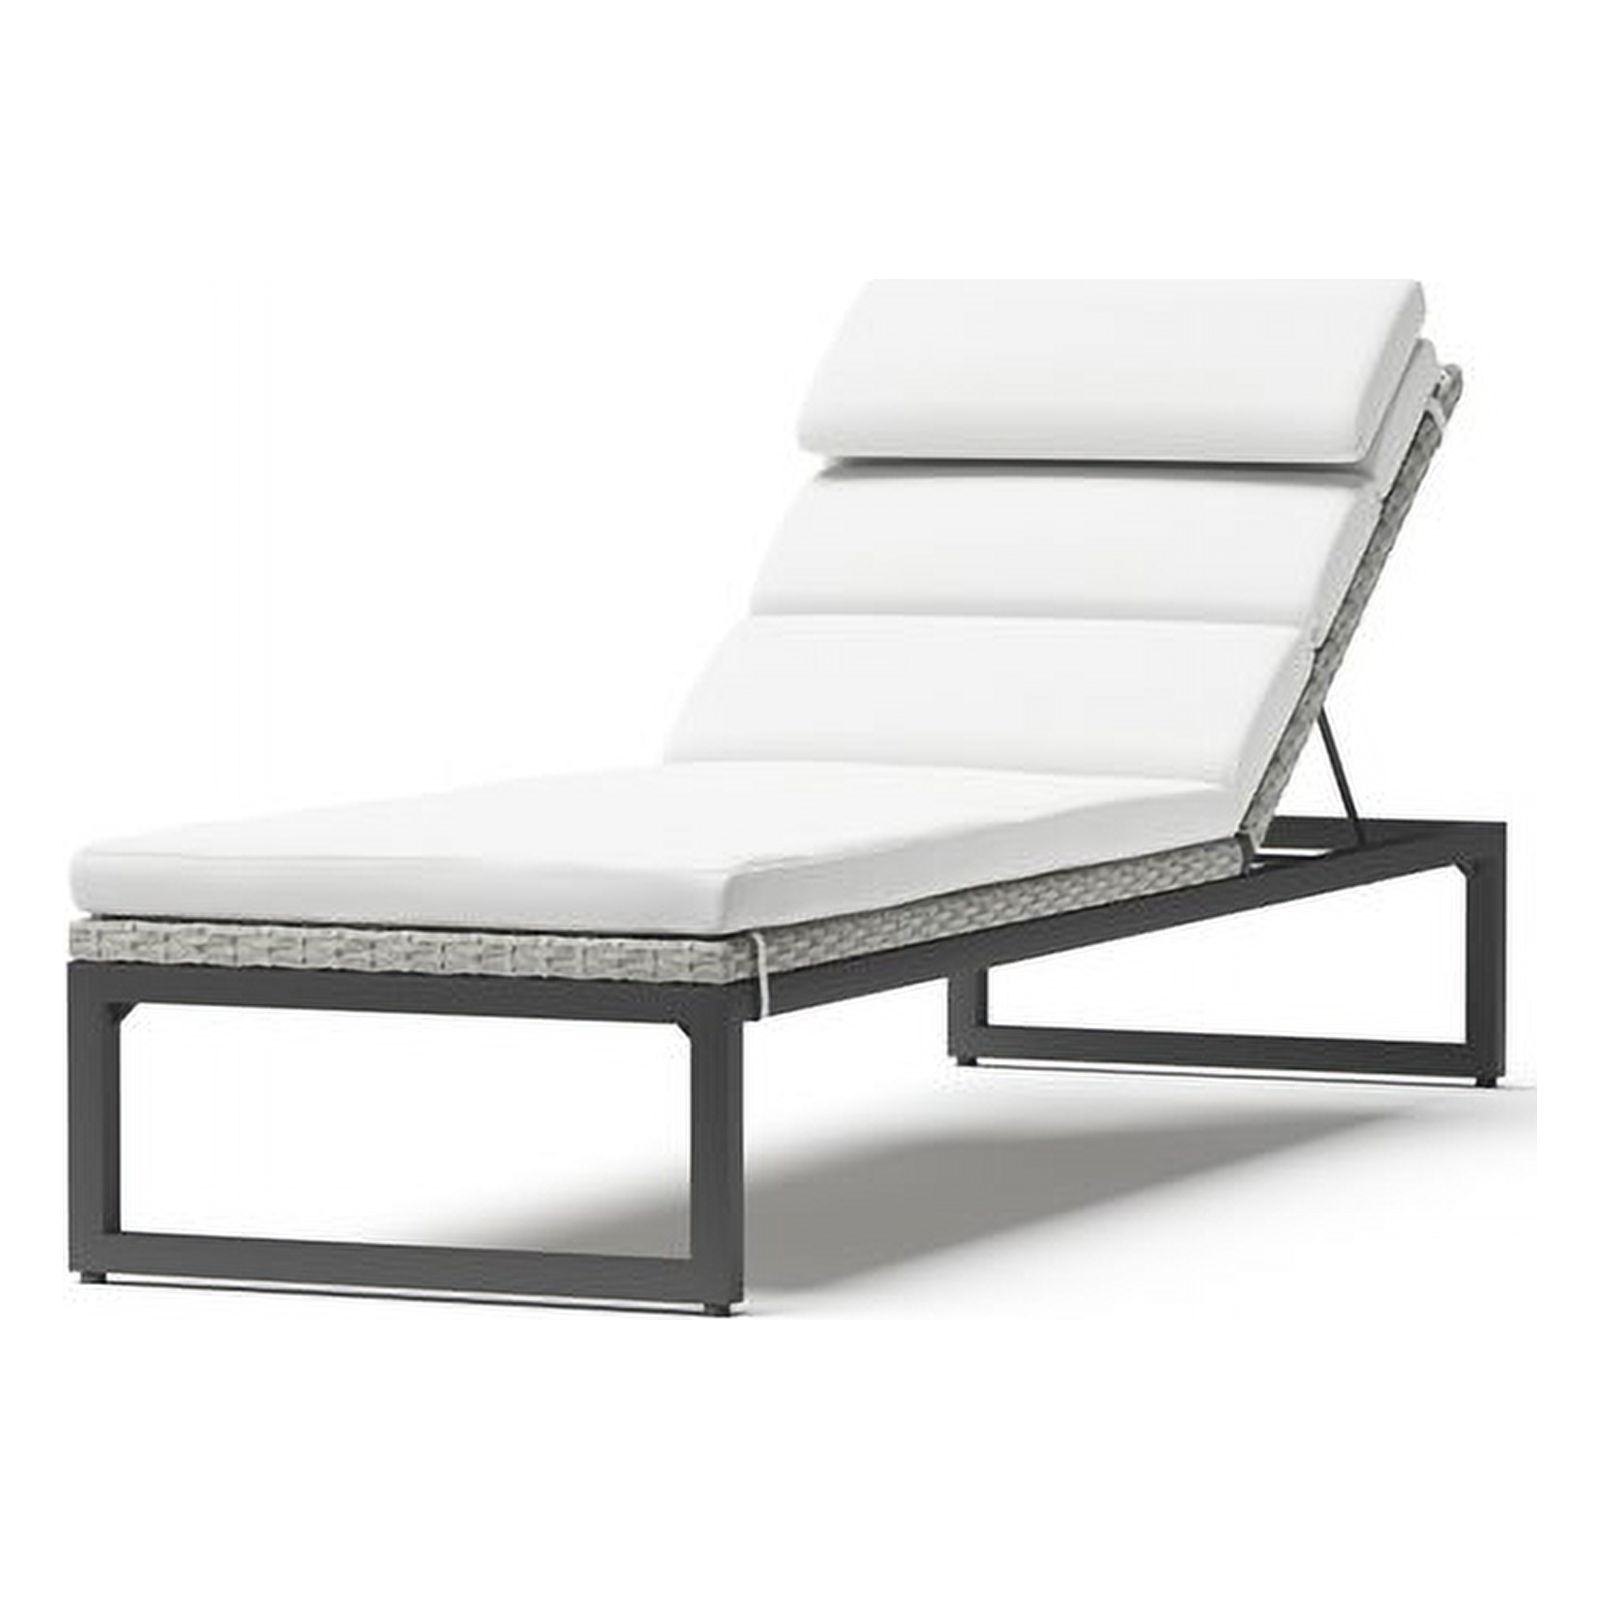 RST Brands Milo Chaise Lounges w/ Cushions in White/Gray (Set of 2) - image 3 of 6